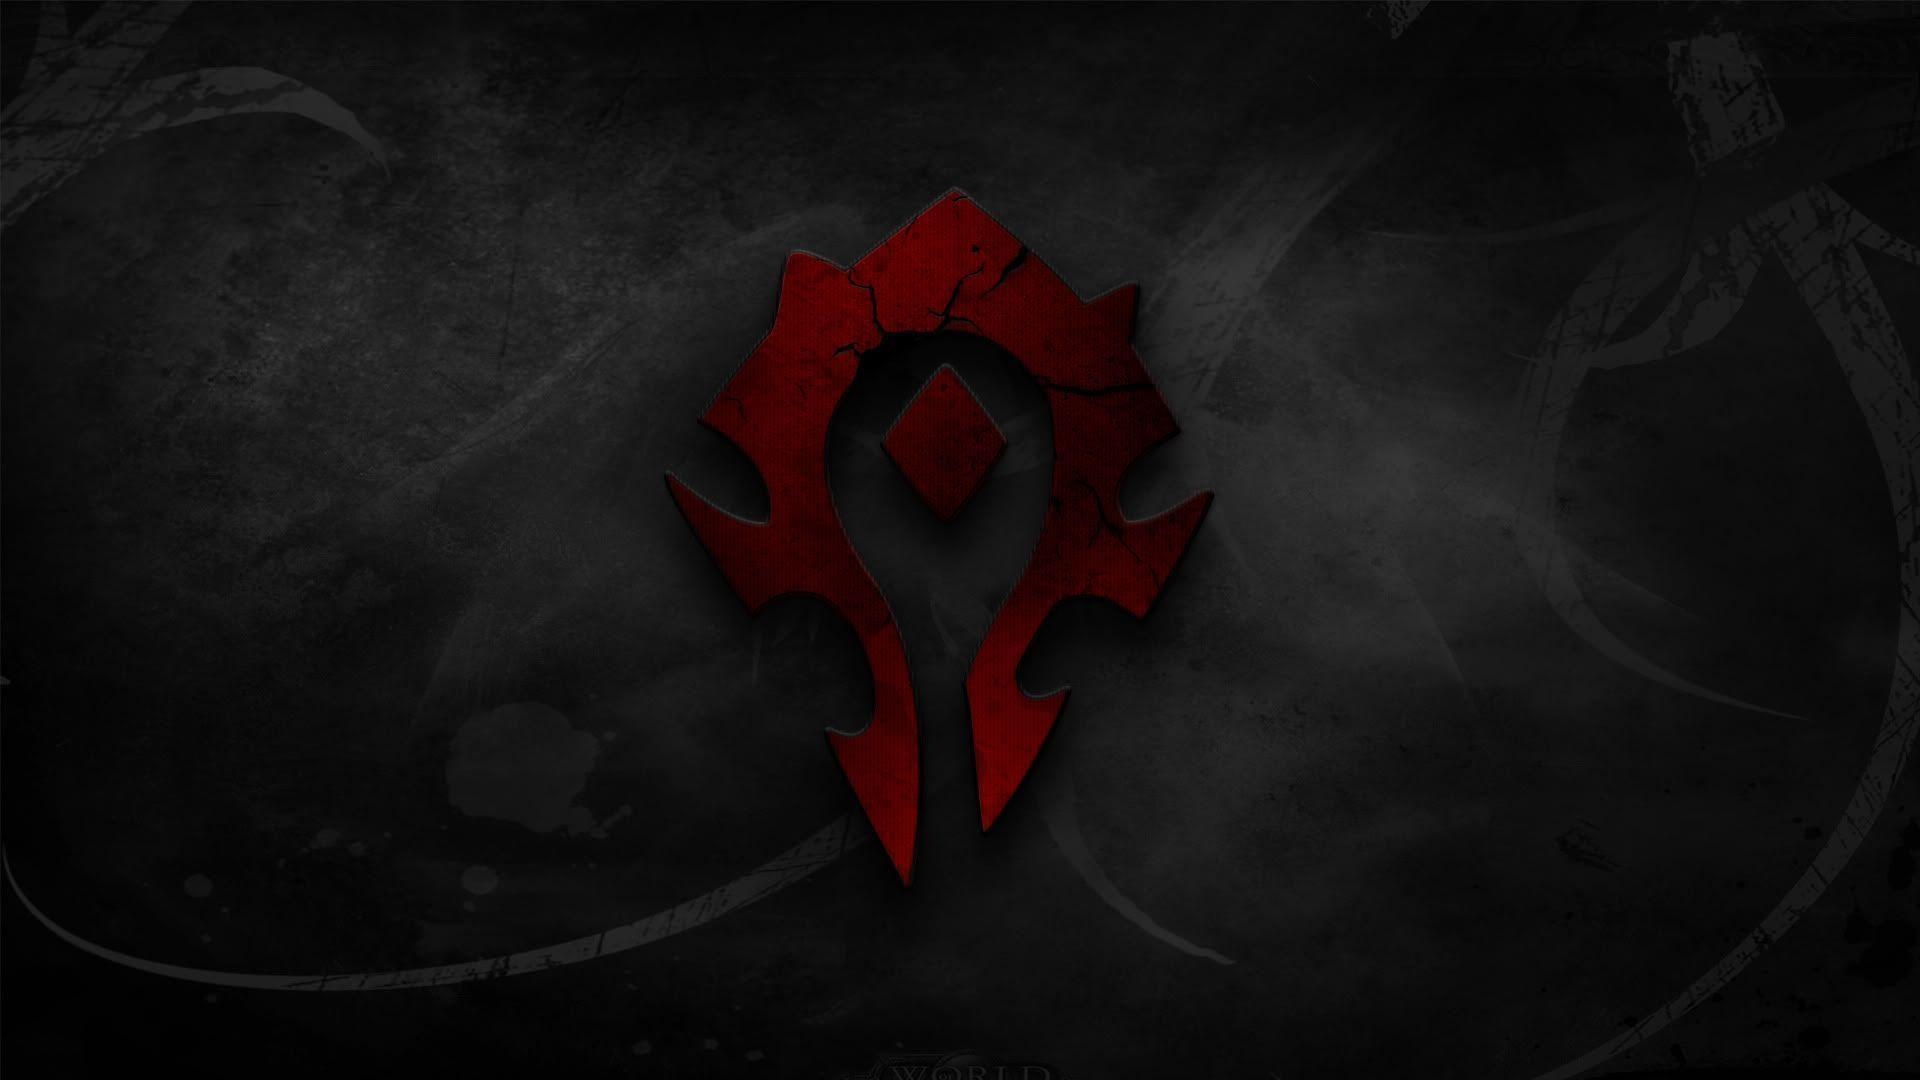 Horde Logo Wow posted by John Sellers 1920x1080